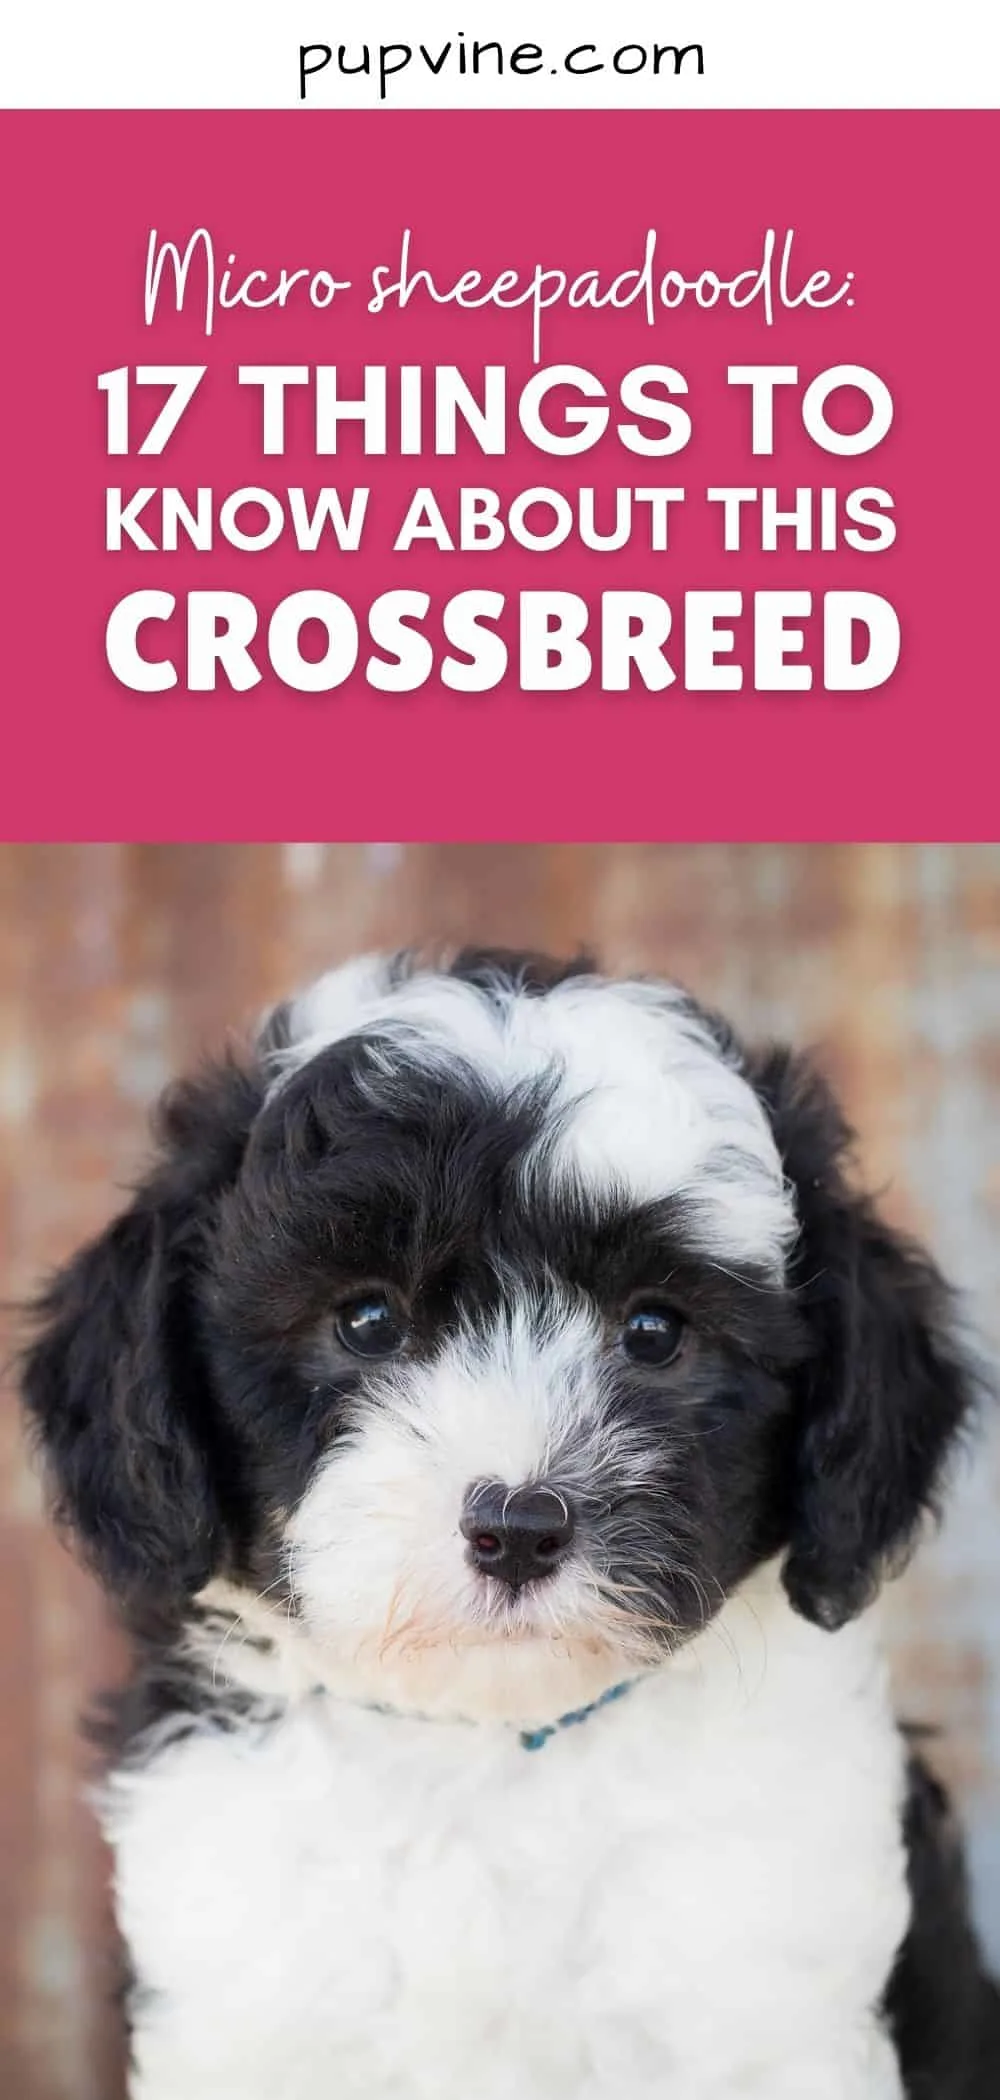 Micro sheepadoodle: 17 Things To Know About This Crossbreed 